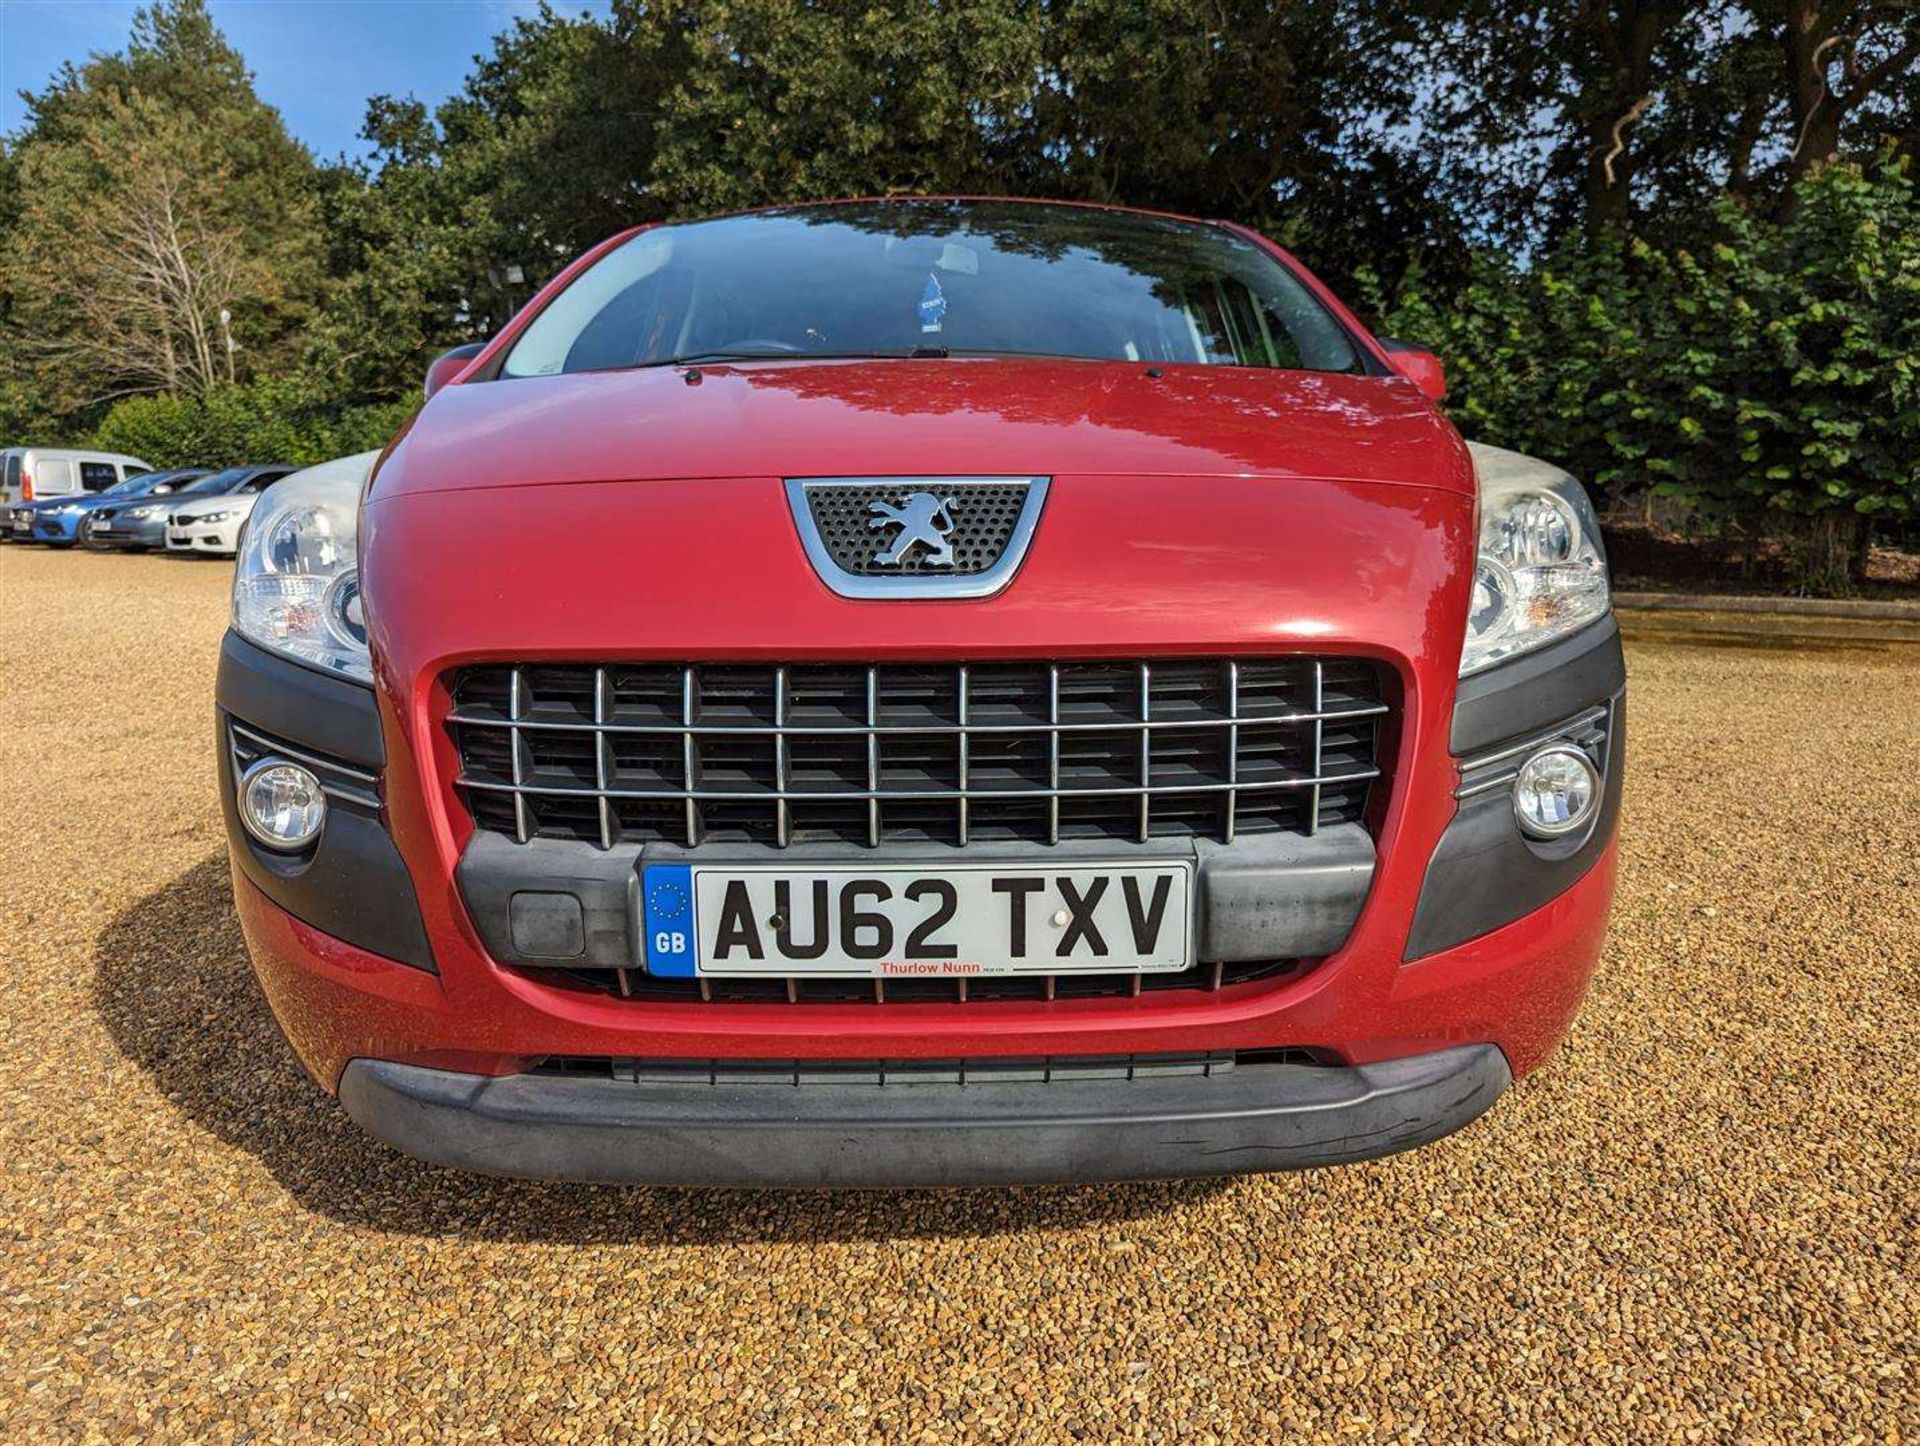 2012 PEUGEOT 3008 ACTIVE HDI - Image 24 of 24